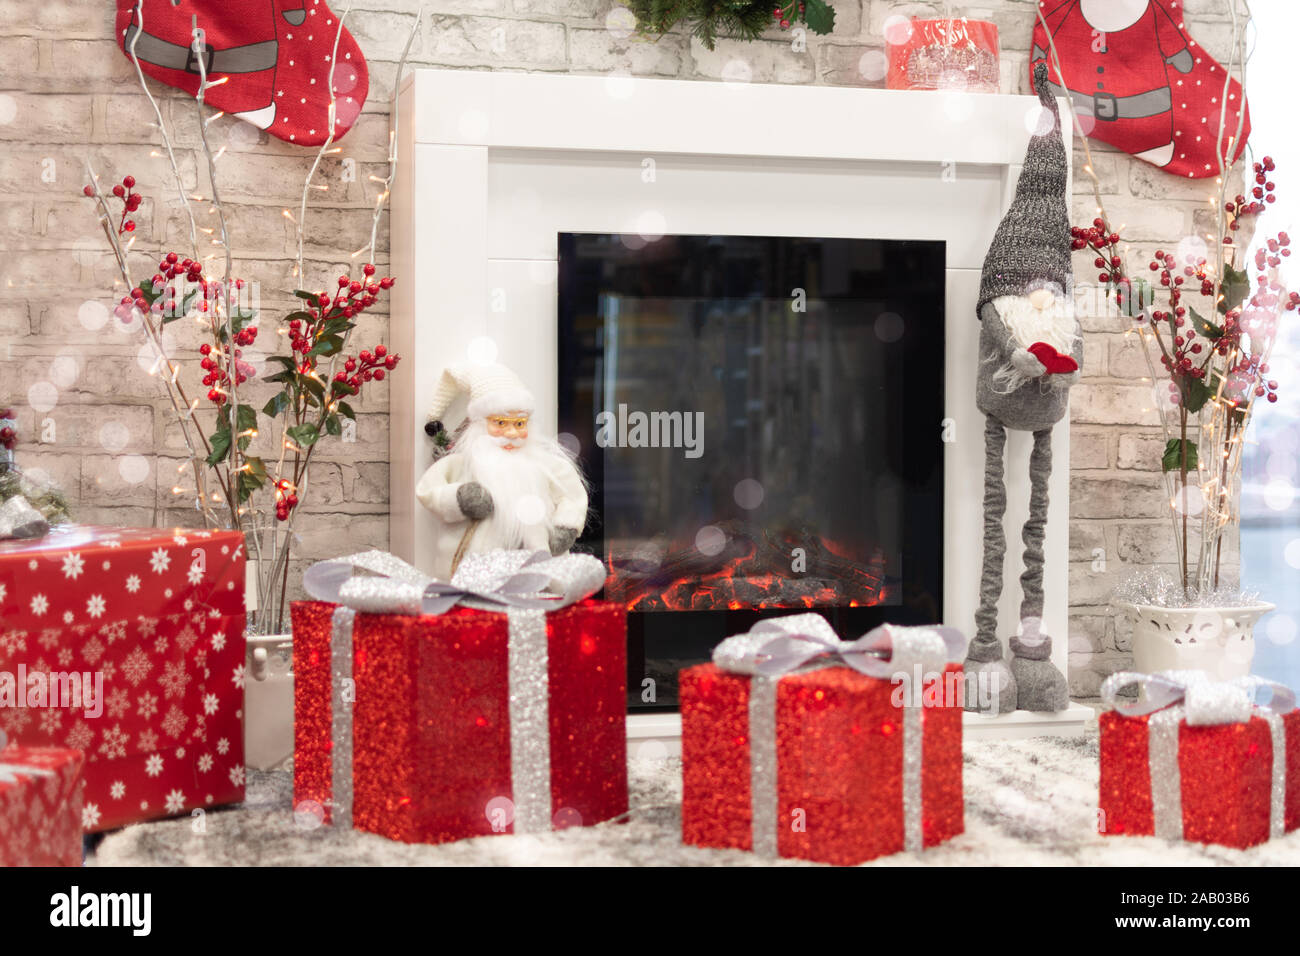 New Year home decorated with gift boxes, red wrapping Santa presents and Christmas decorations. Living room with fireplace decorated for Christmas hol Stock Photo